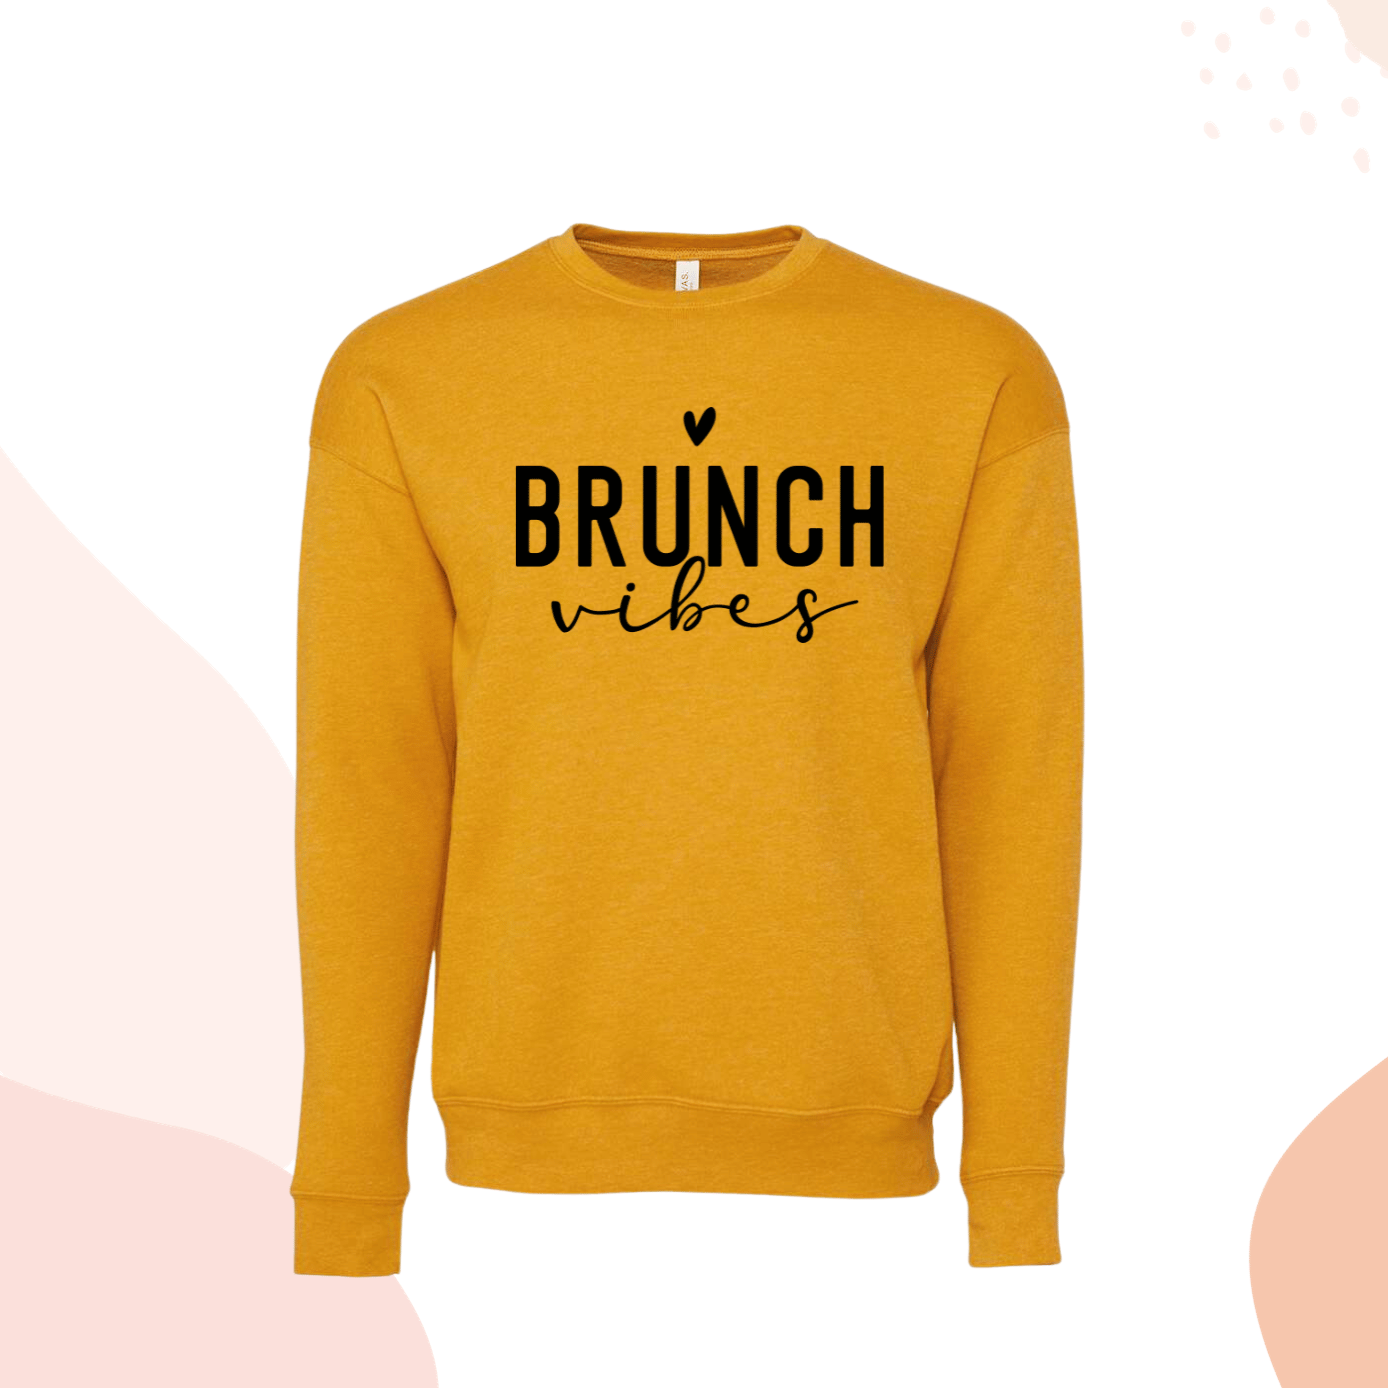 Brunch Vibes Sweatshirt Gold Crewneck for Women Brunch Outfit ideas Gold Sweater for Her